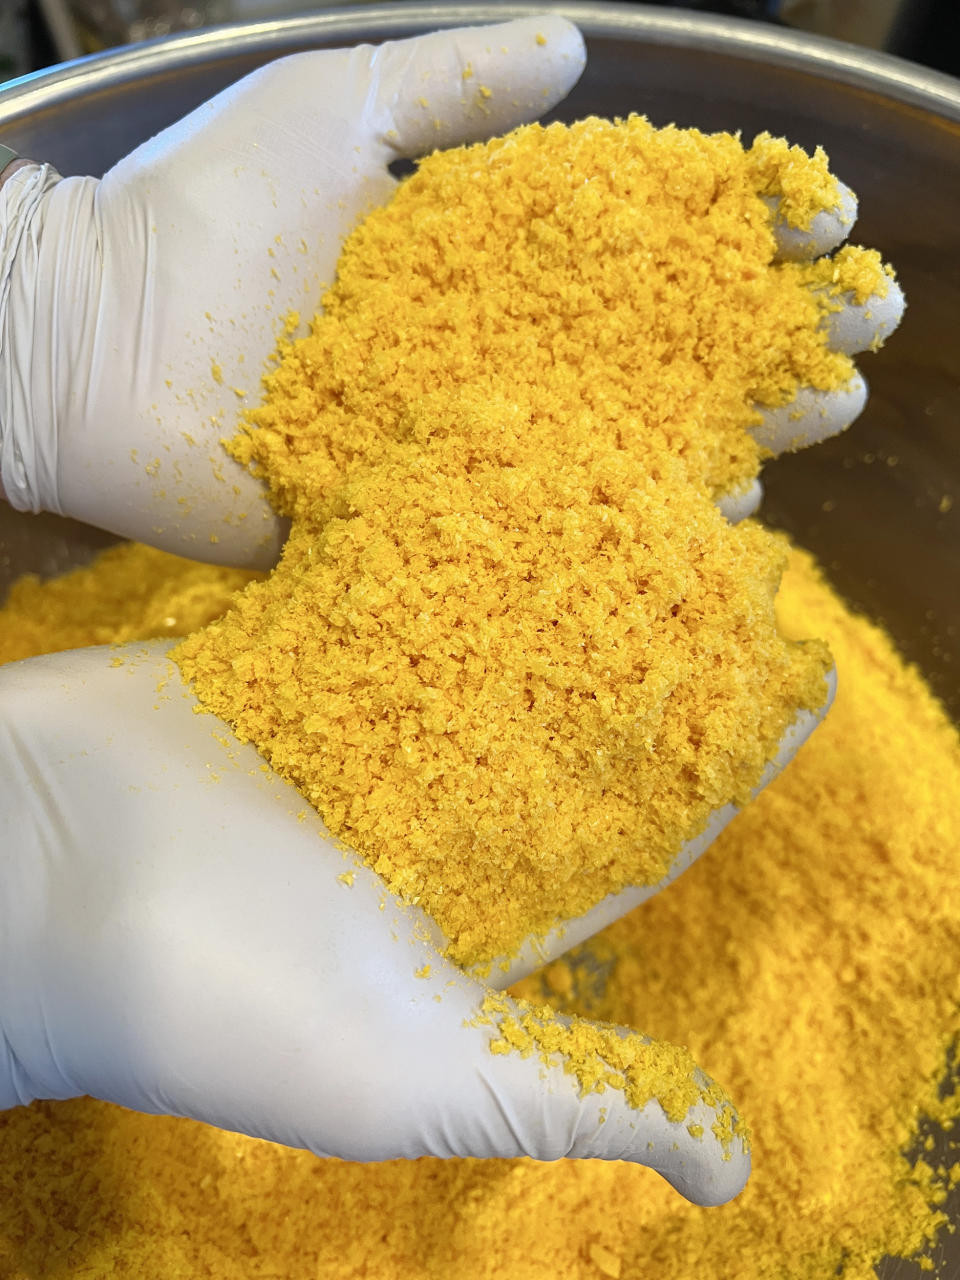 Freeze-dried eggs crumble easily into a powder Kern calls “gold dust.” (Back Forty Photography)